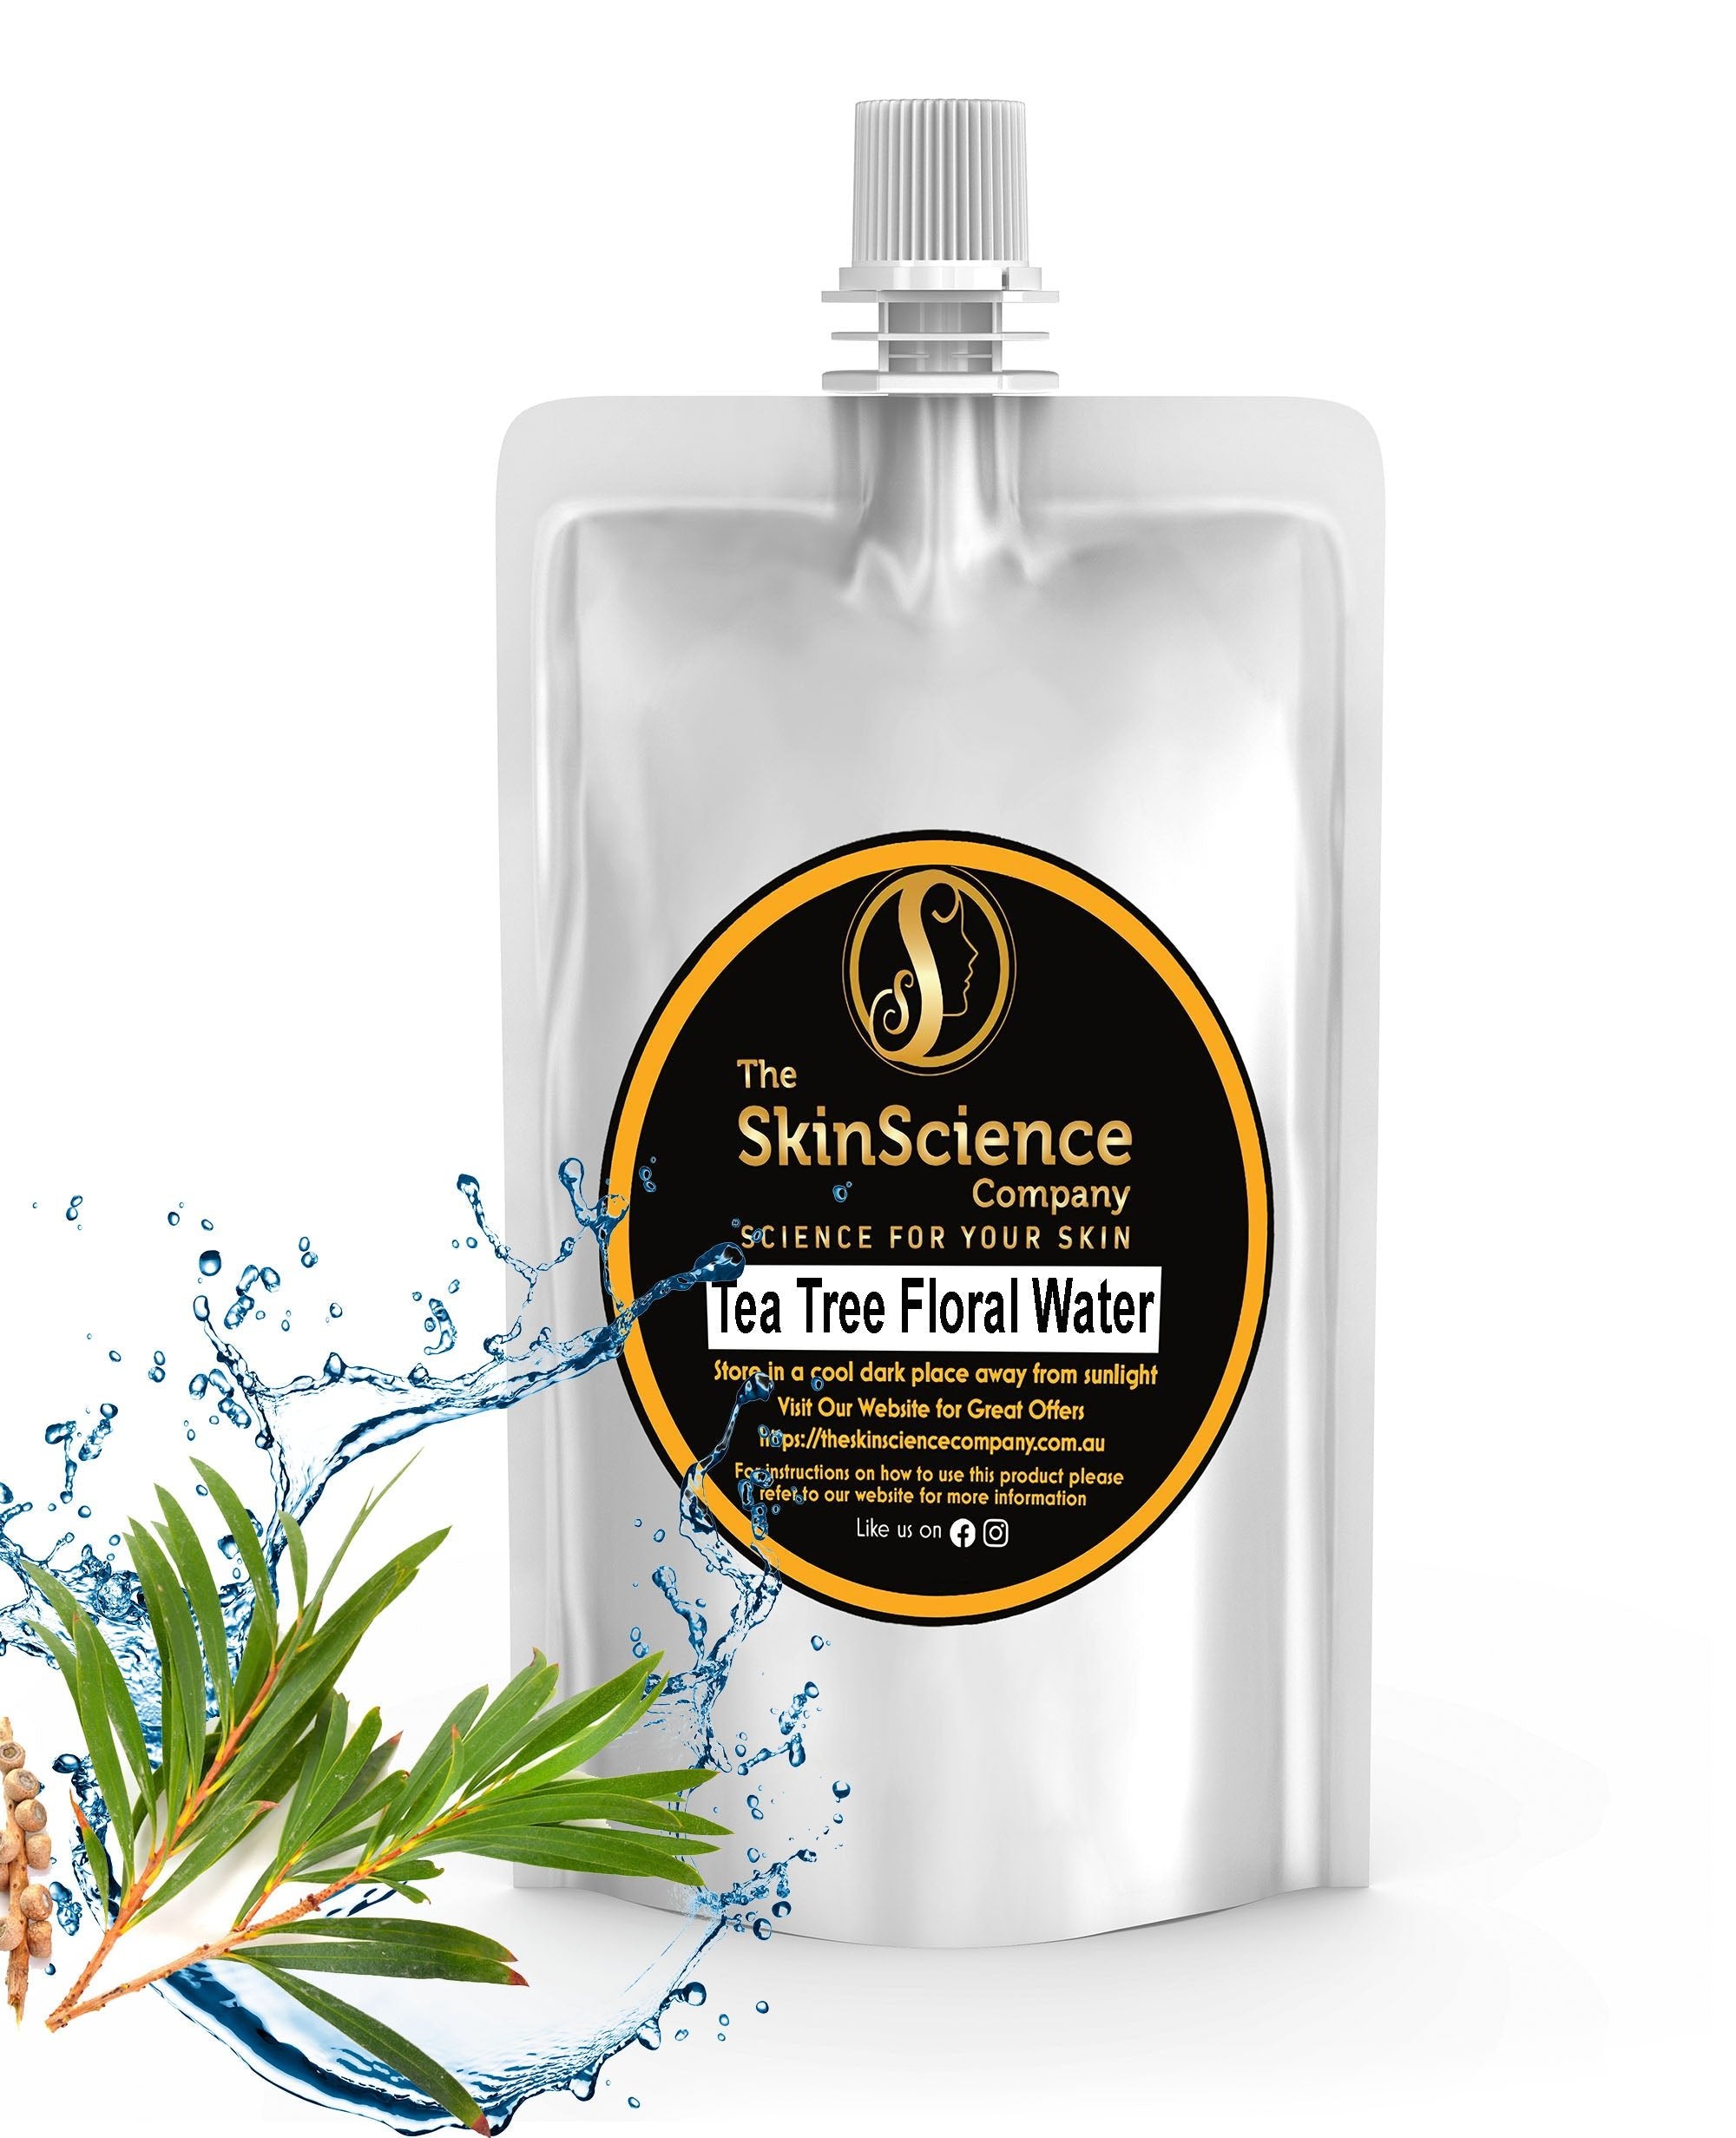 Tea Tree Floral Water - The SkinScience Company